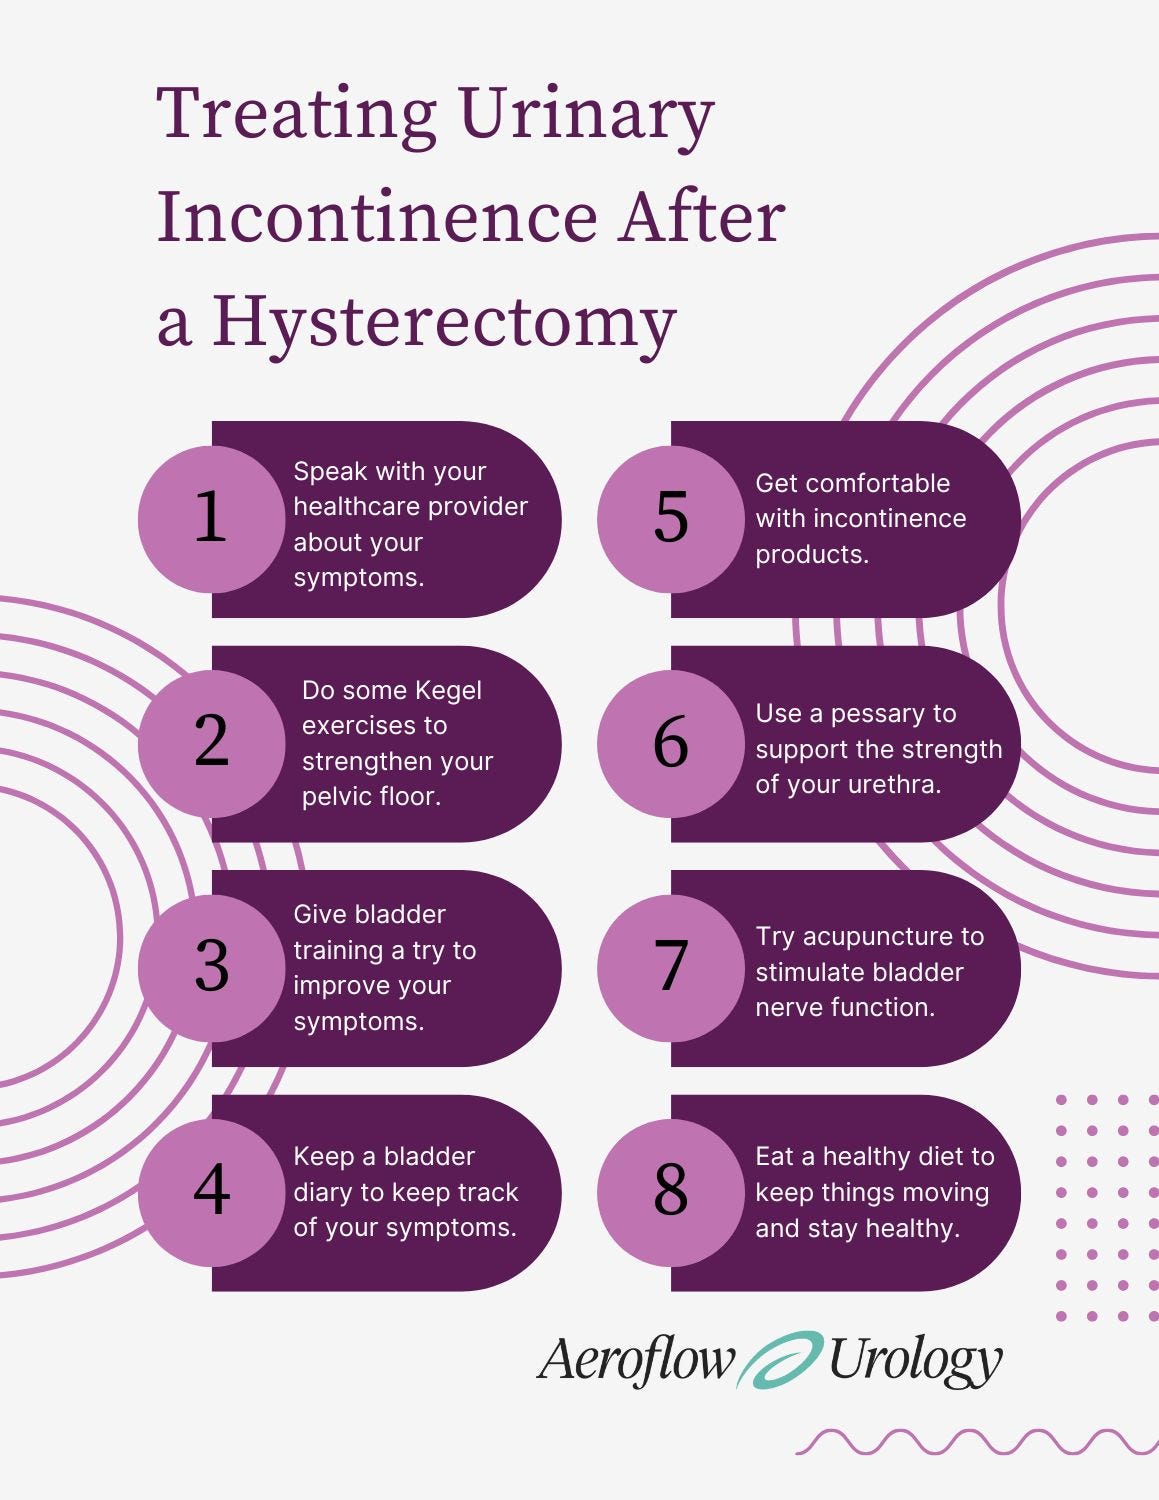 Graphic about treating urinary incontinence after a hysterectomy